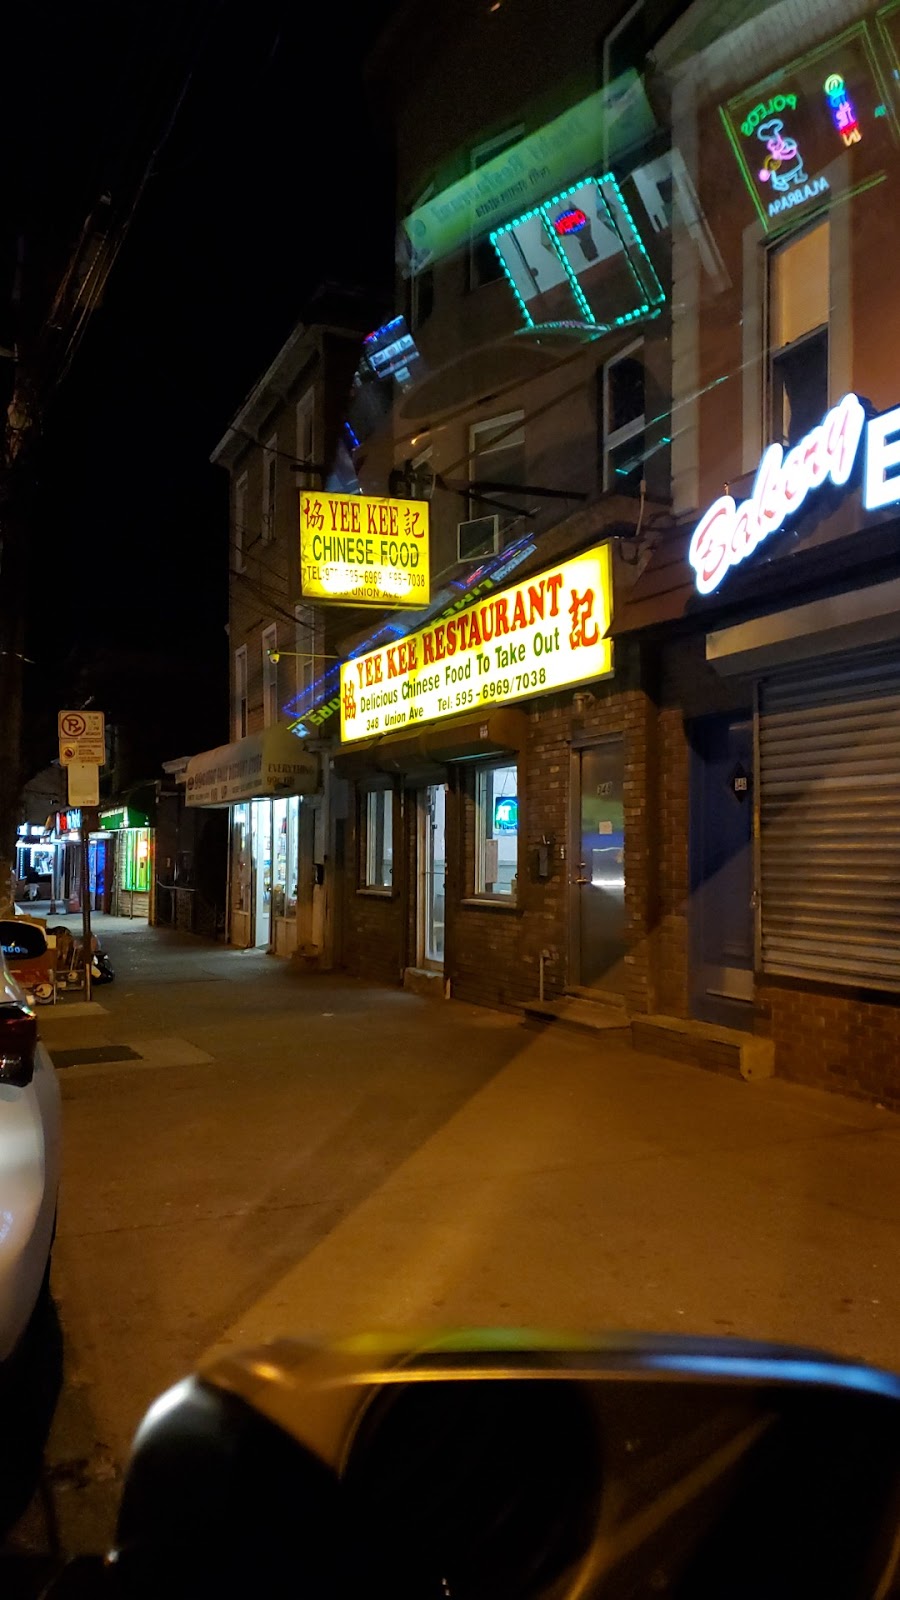 Yee Kee Chinese Restaurant | 348 Union Ave, Paterson, NJ 07502, USA | Phone: (973) 595-6969